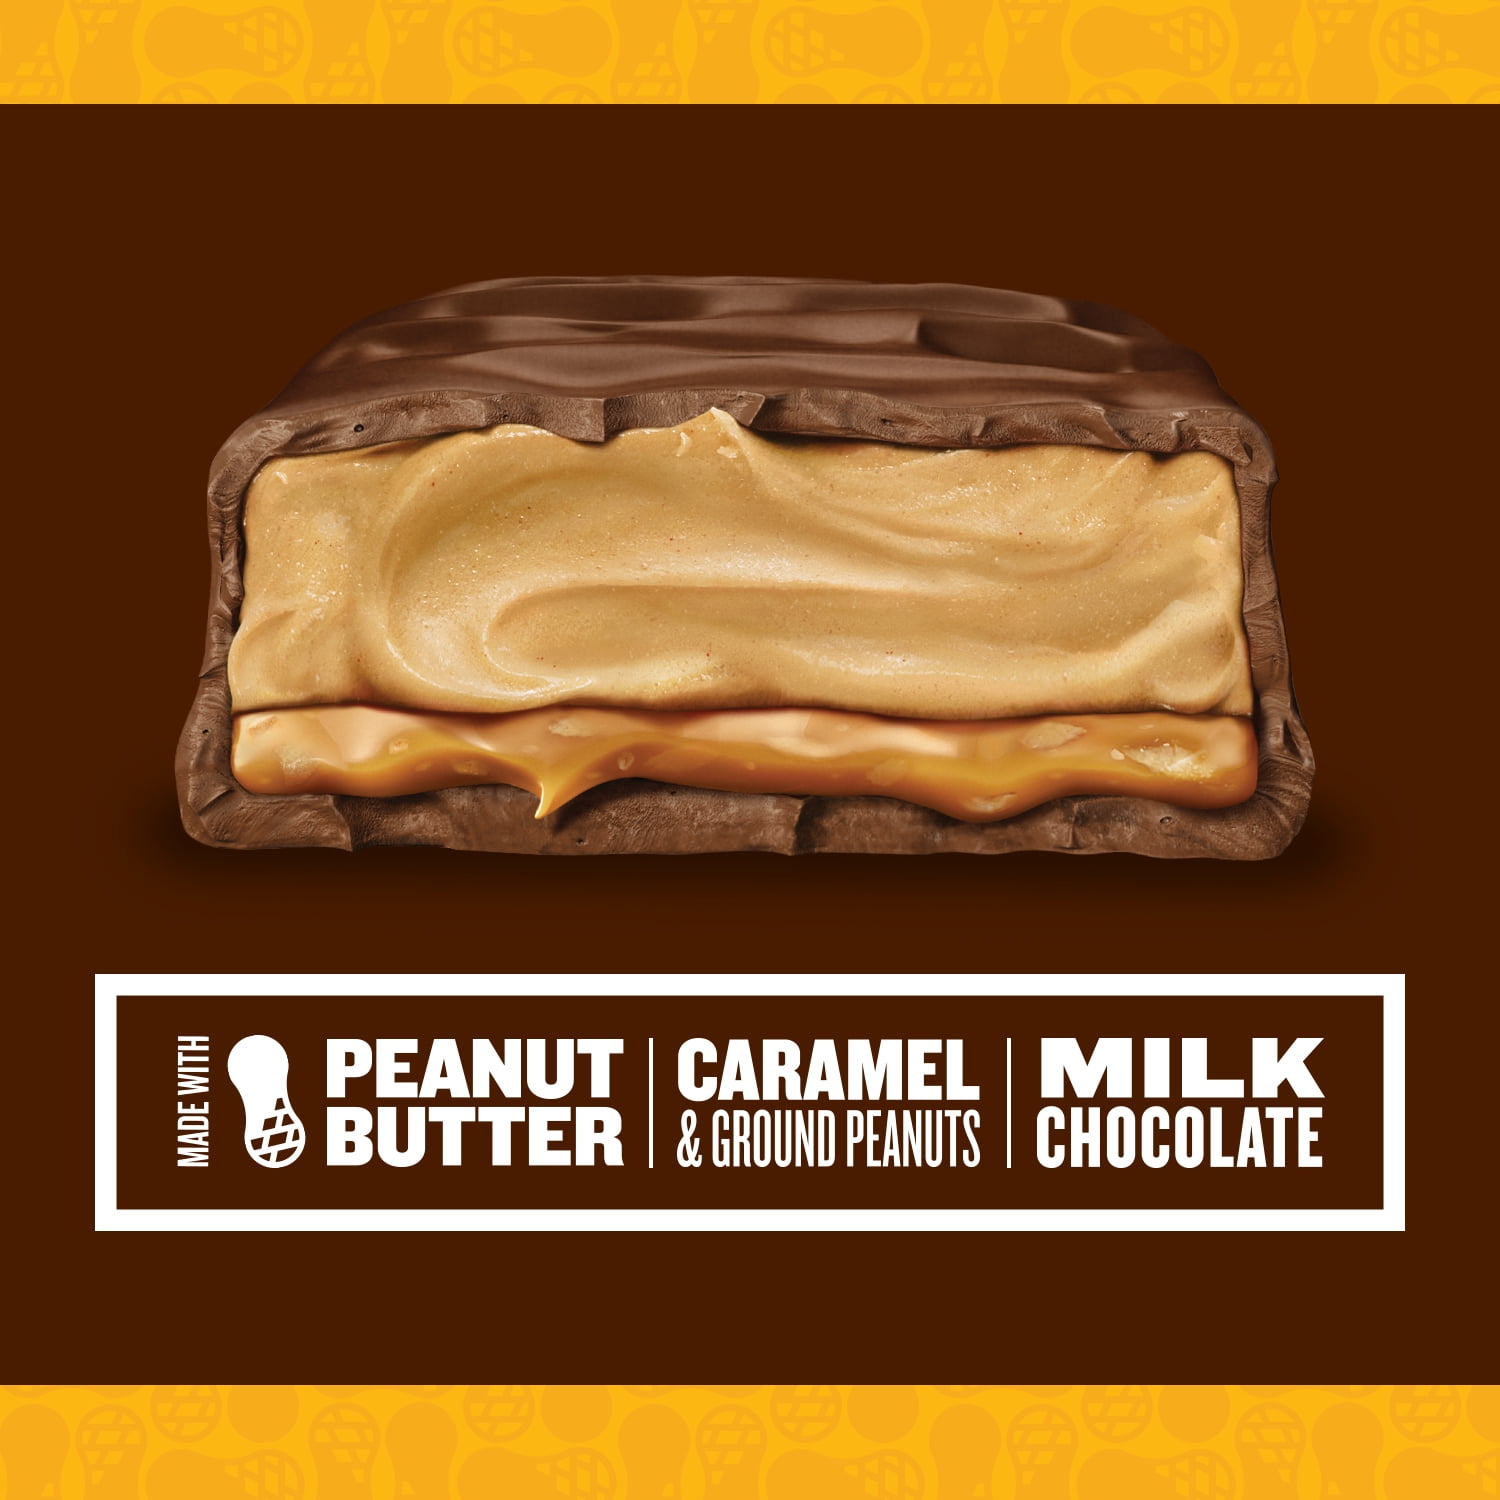 Snickers Peanut Butter Candy Bars Squared, Fun Size Snacks 11.5 oz (326 g)